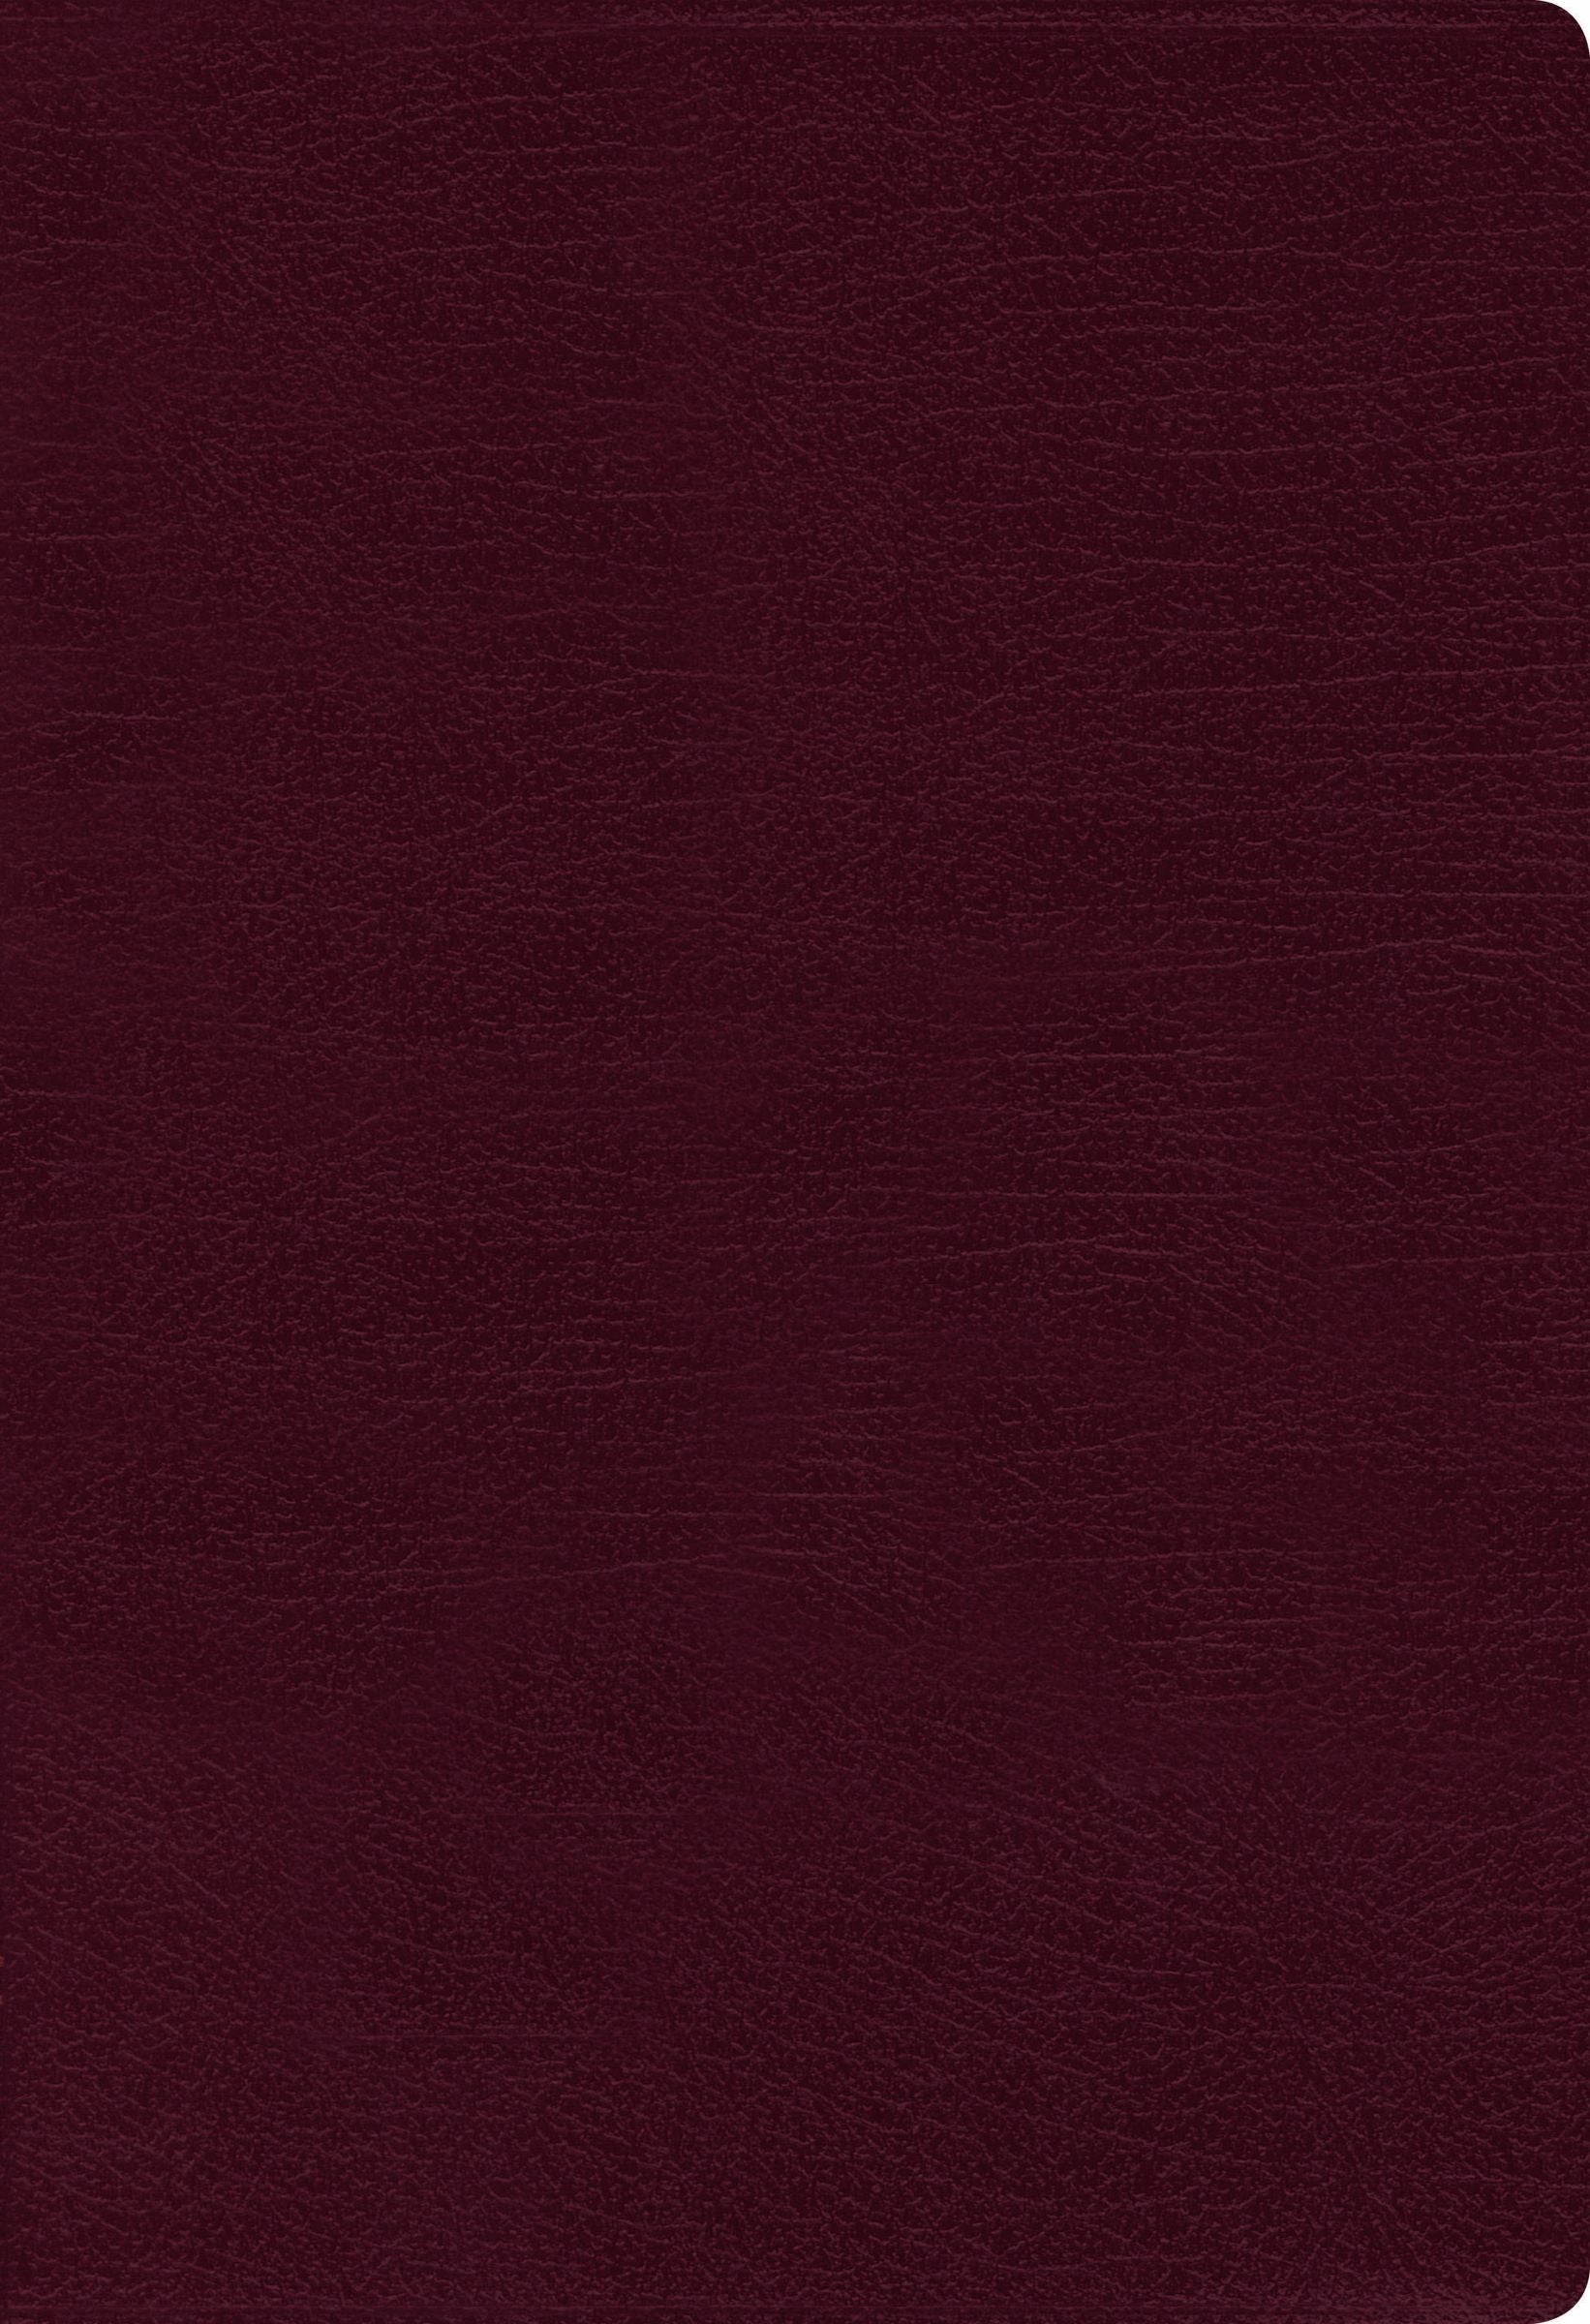 Image of NASB, Thinline Bible, Bonded Leather, Burgundy, Red Letter, 1995 Text, Comfort Print other